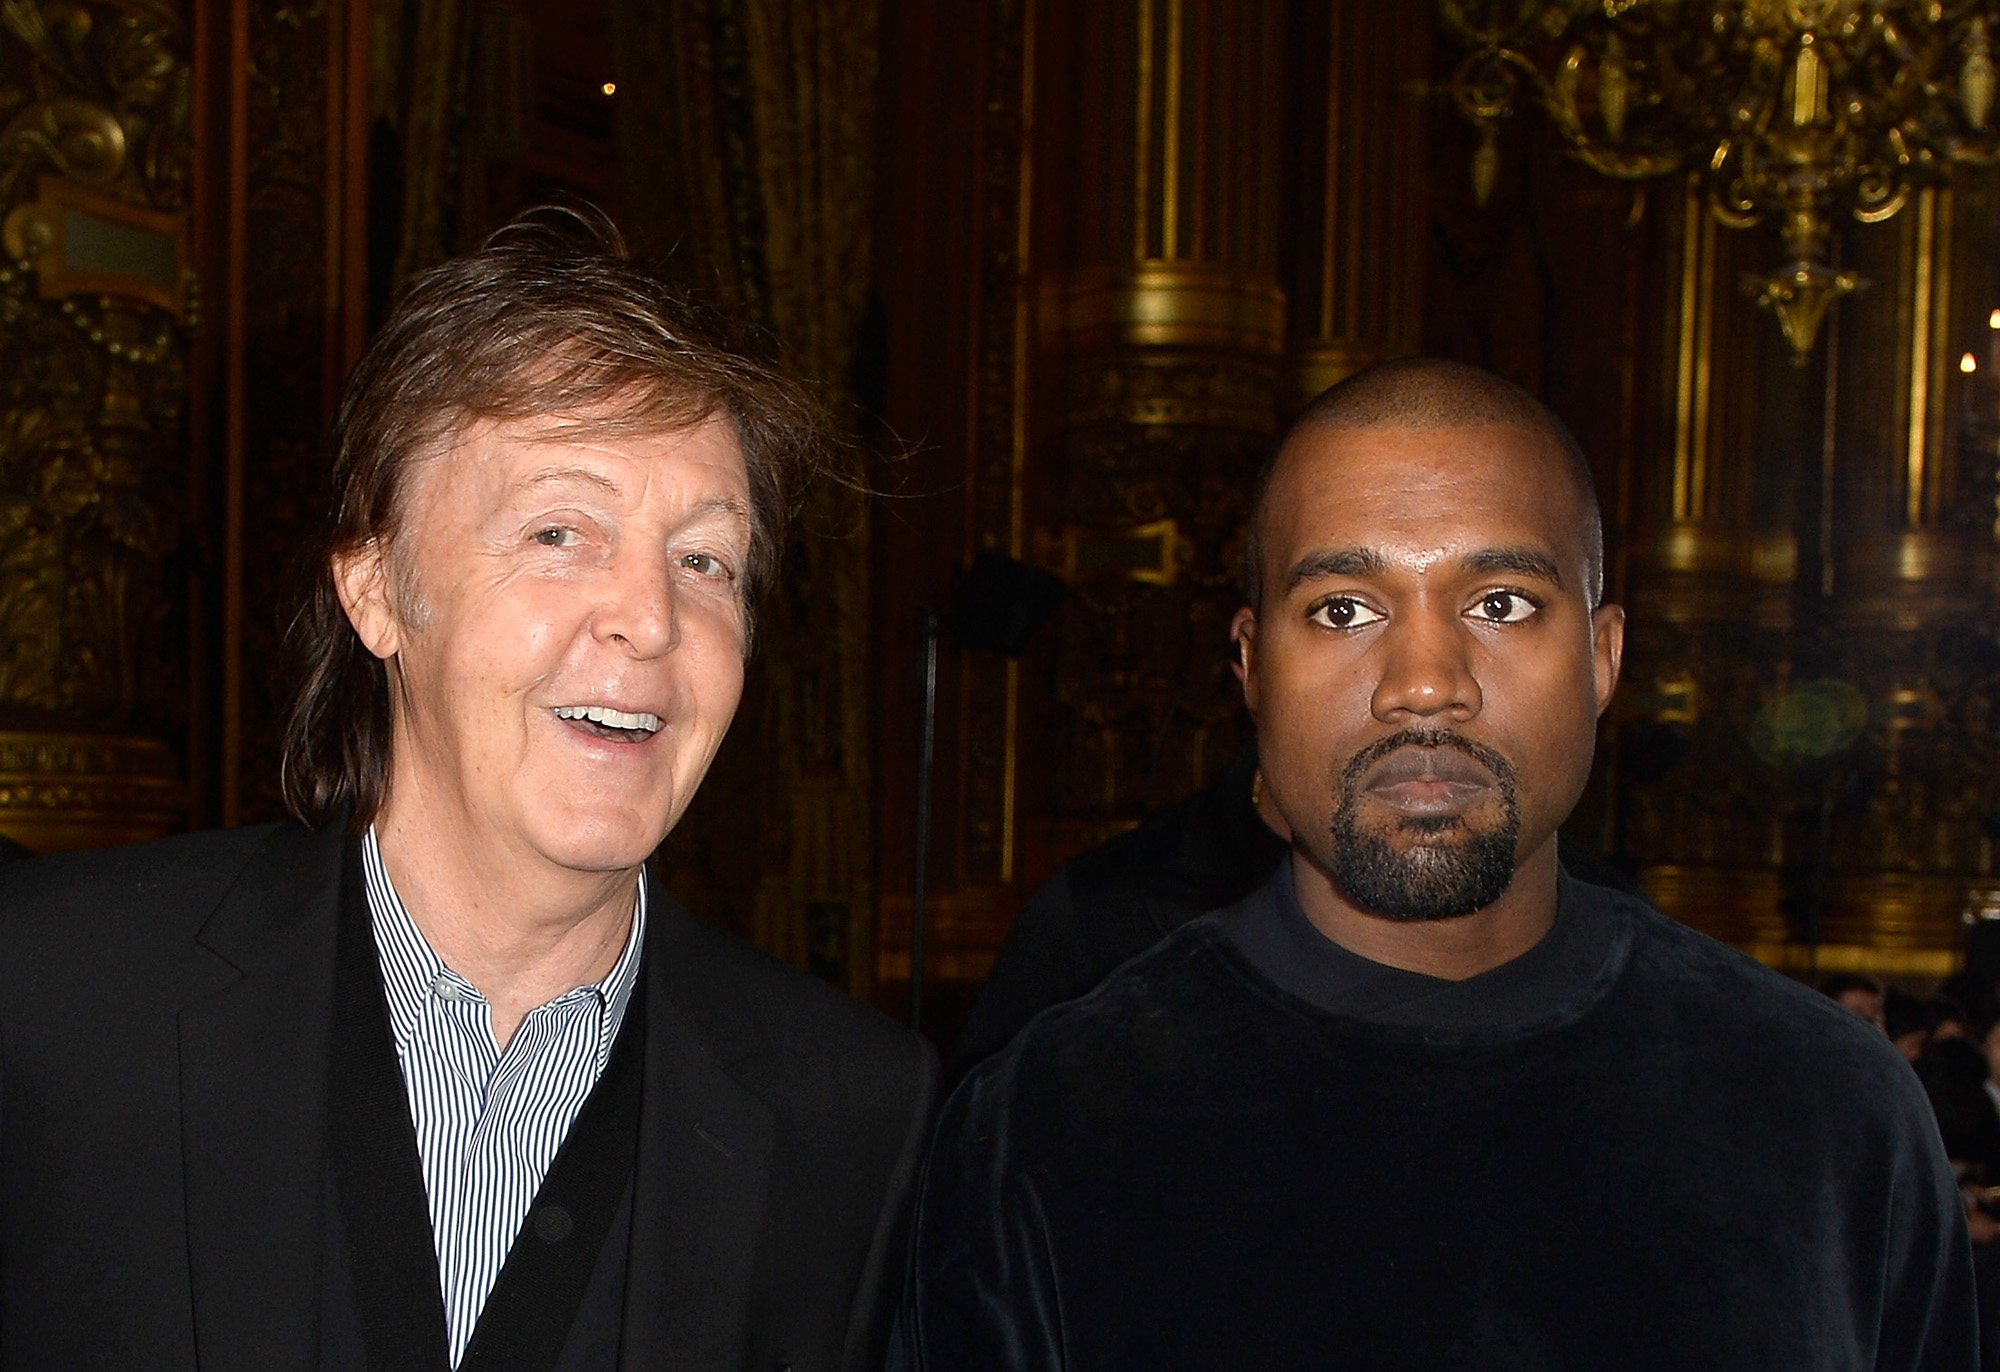 Paul McCartney and Kanye West attend the Stella McCartney show as part of the Paris Fashion Week Womenswear Fall/Winter 2015/2016 on March 9, 2015 in Paris, France.  (Photo by Pascal Le Segretain/Getty Images) (Pascal Le Segretain&mdash;Getty Images)